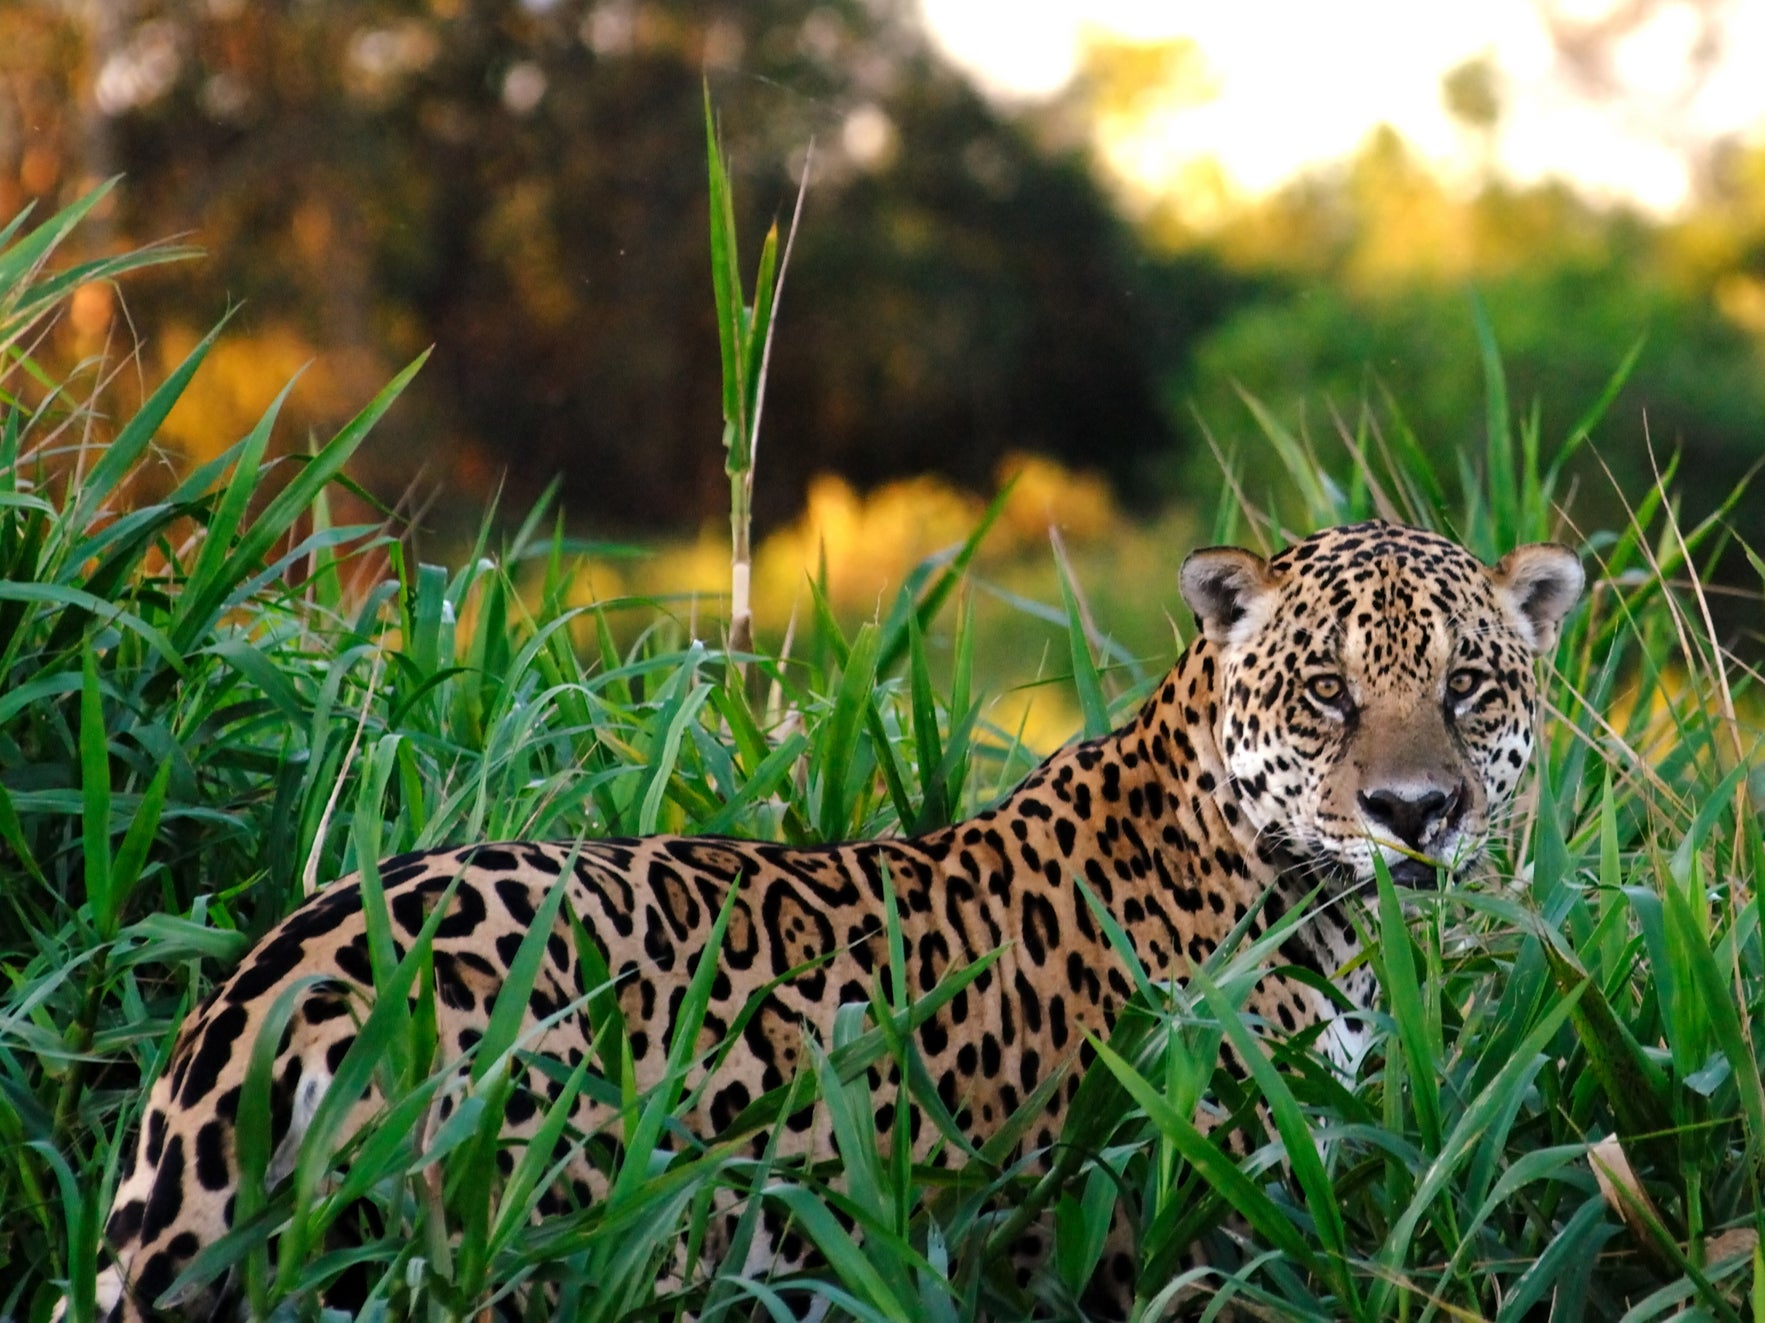 Jaguars are among the rare animals that live in the Amazon